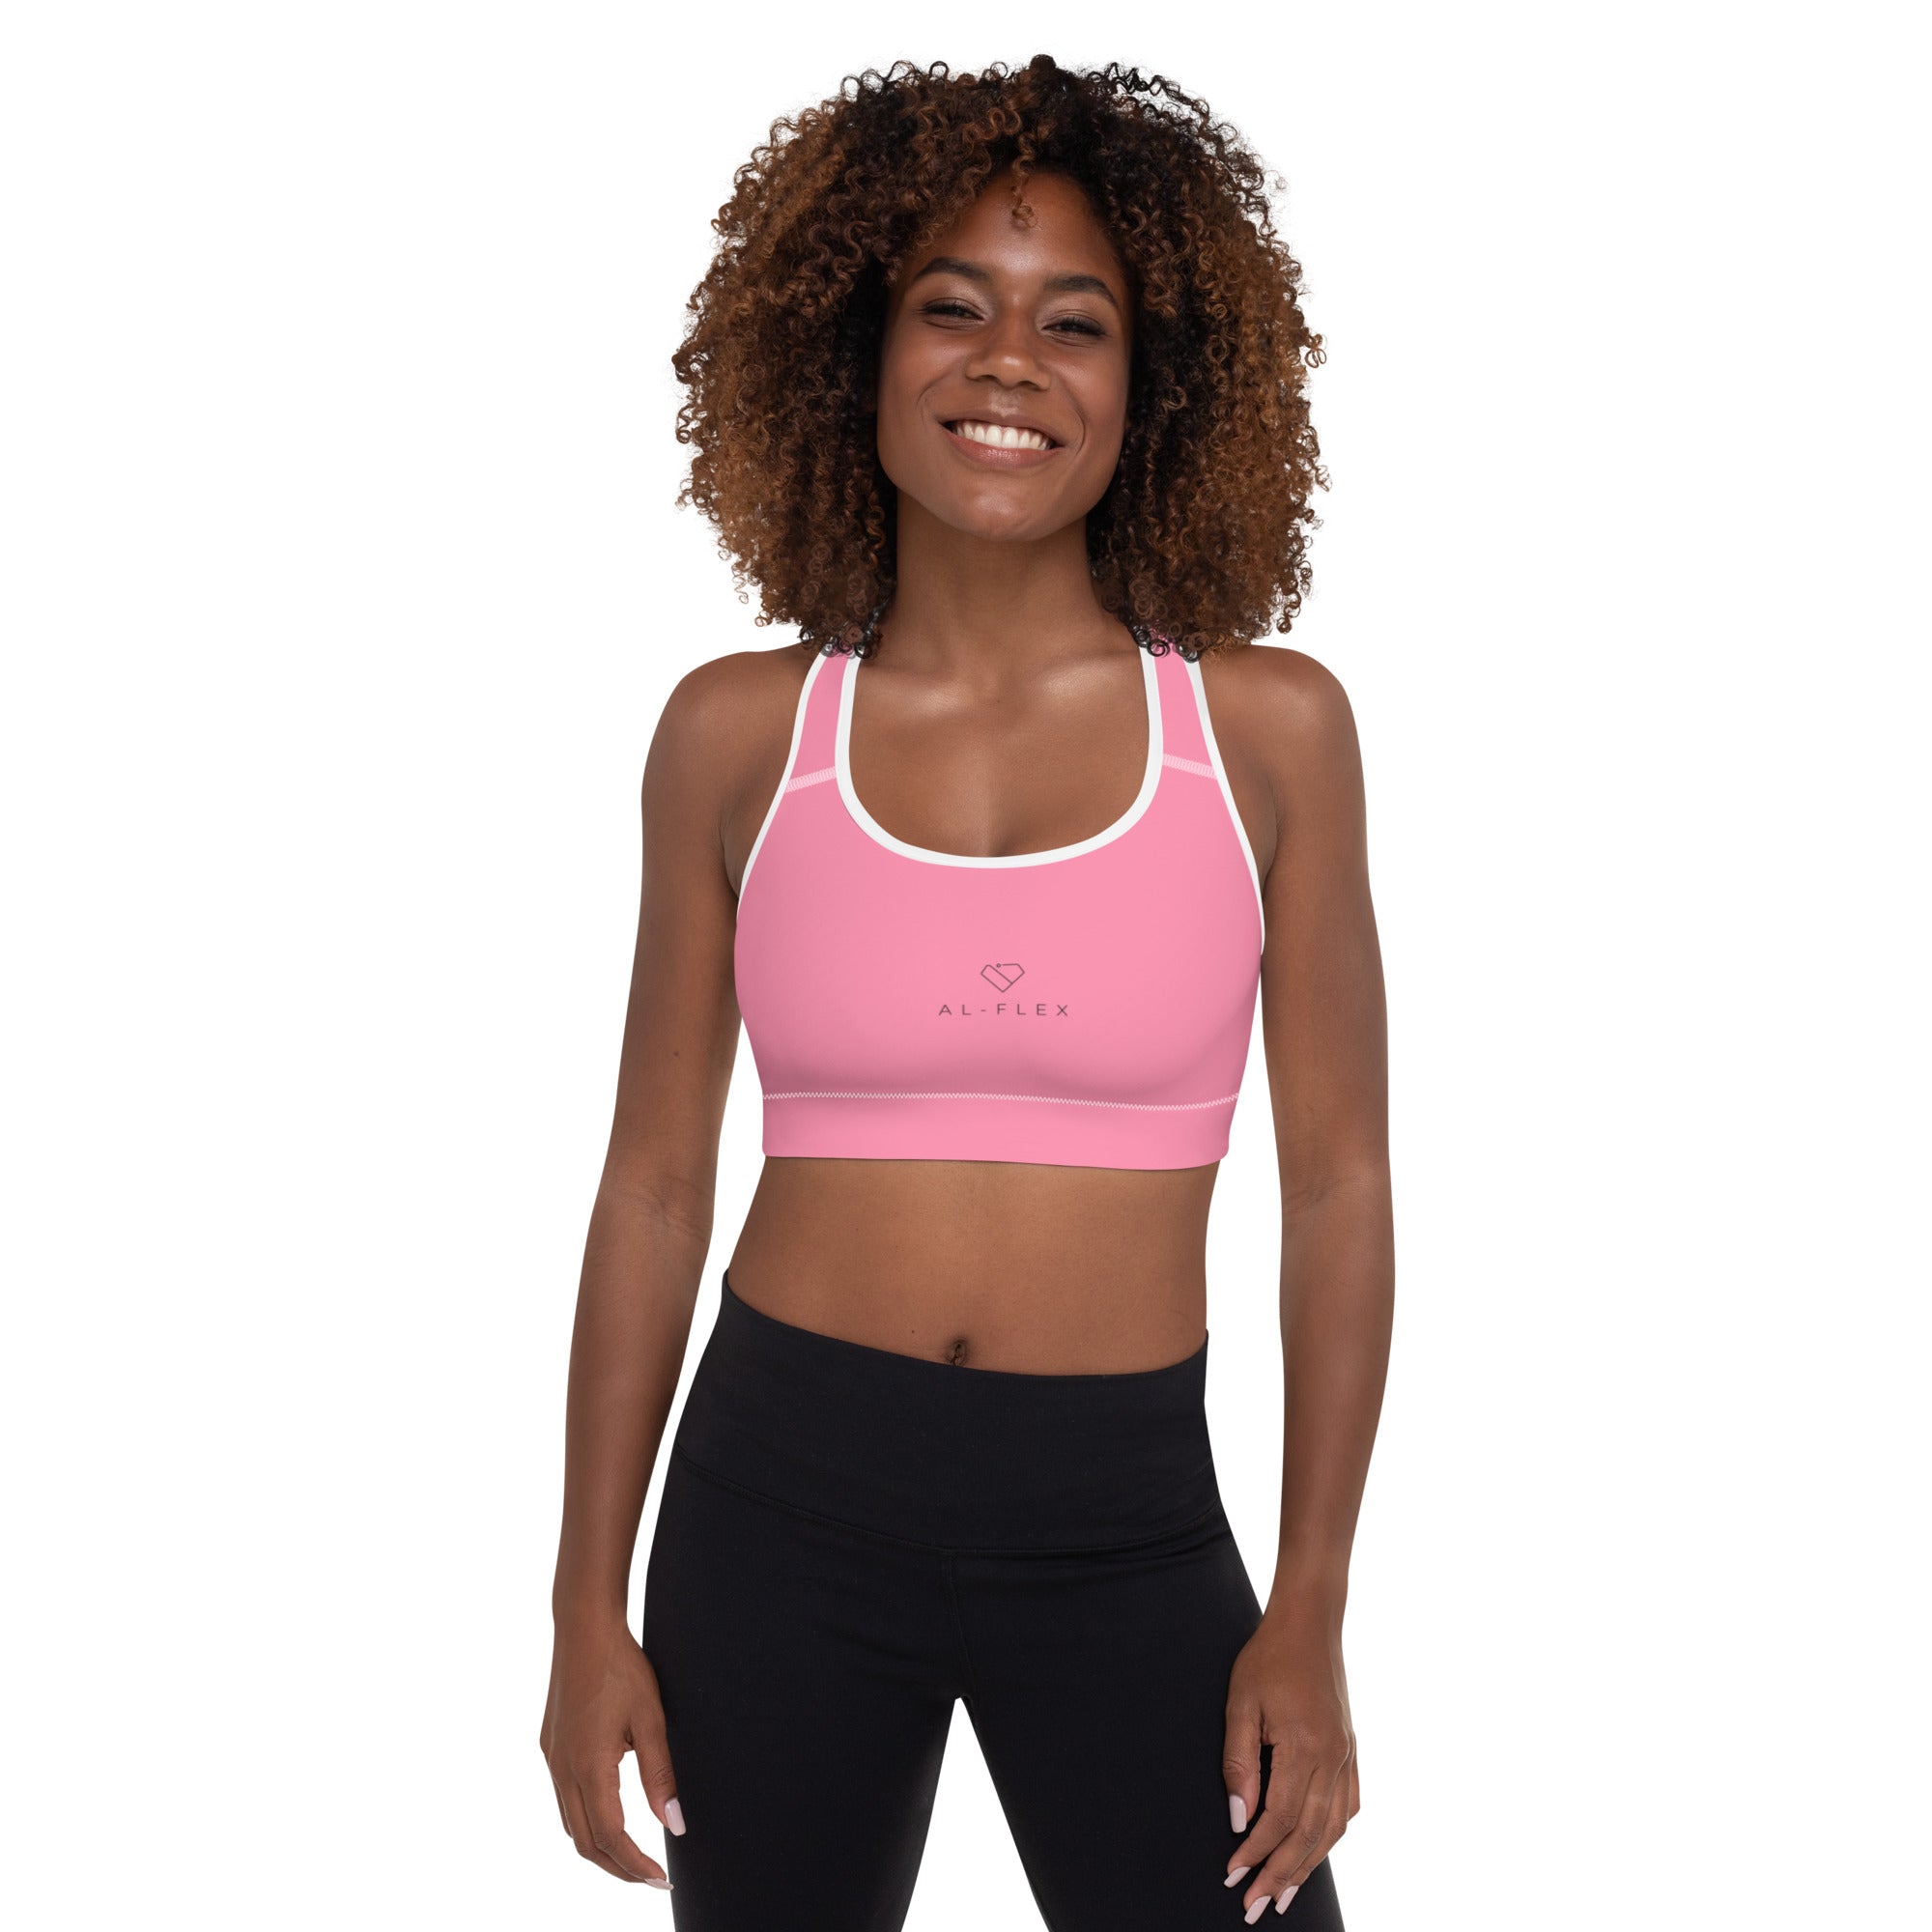 OFF THE POLE Signature Sports Bra - Pink *SIZE XL ONLY*